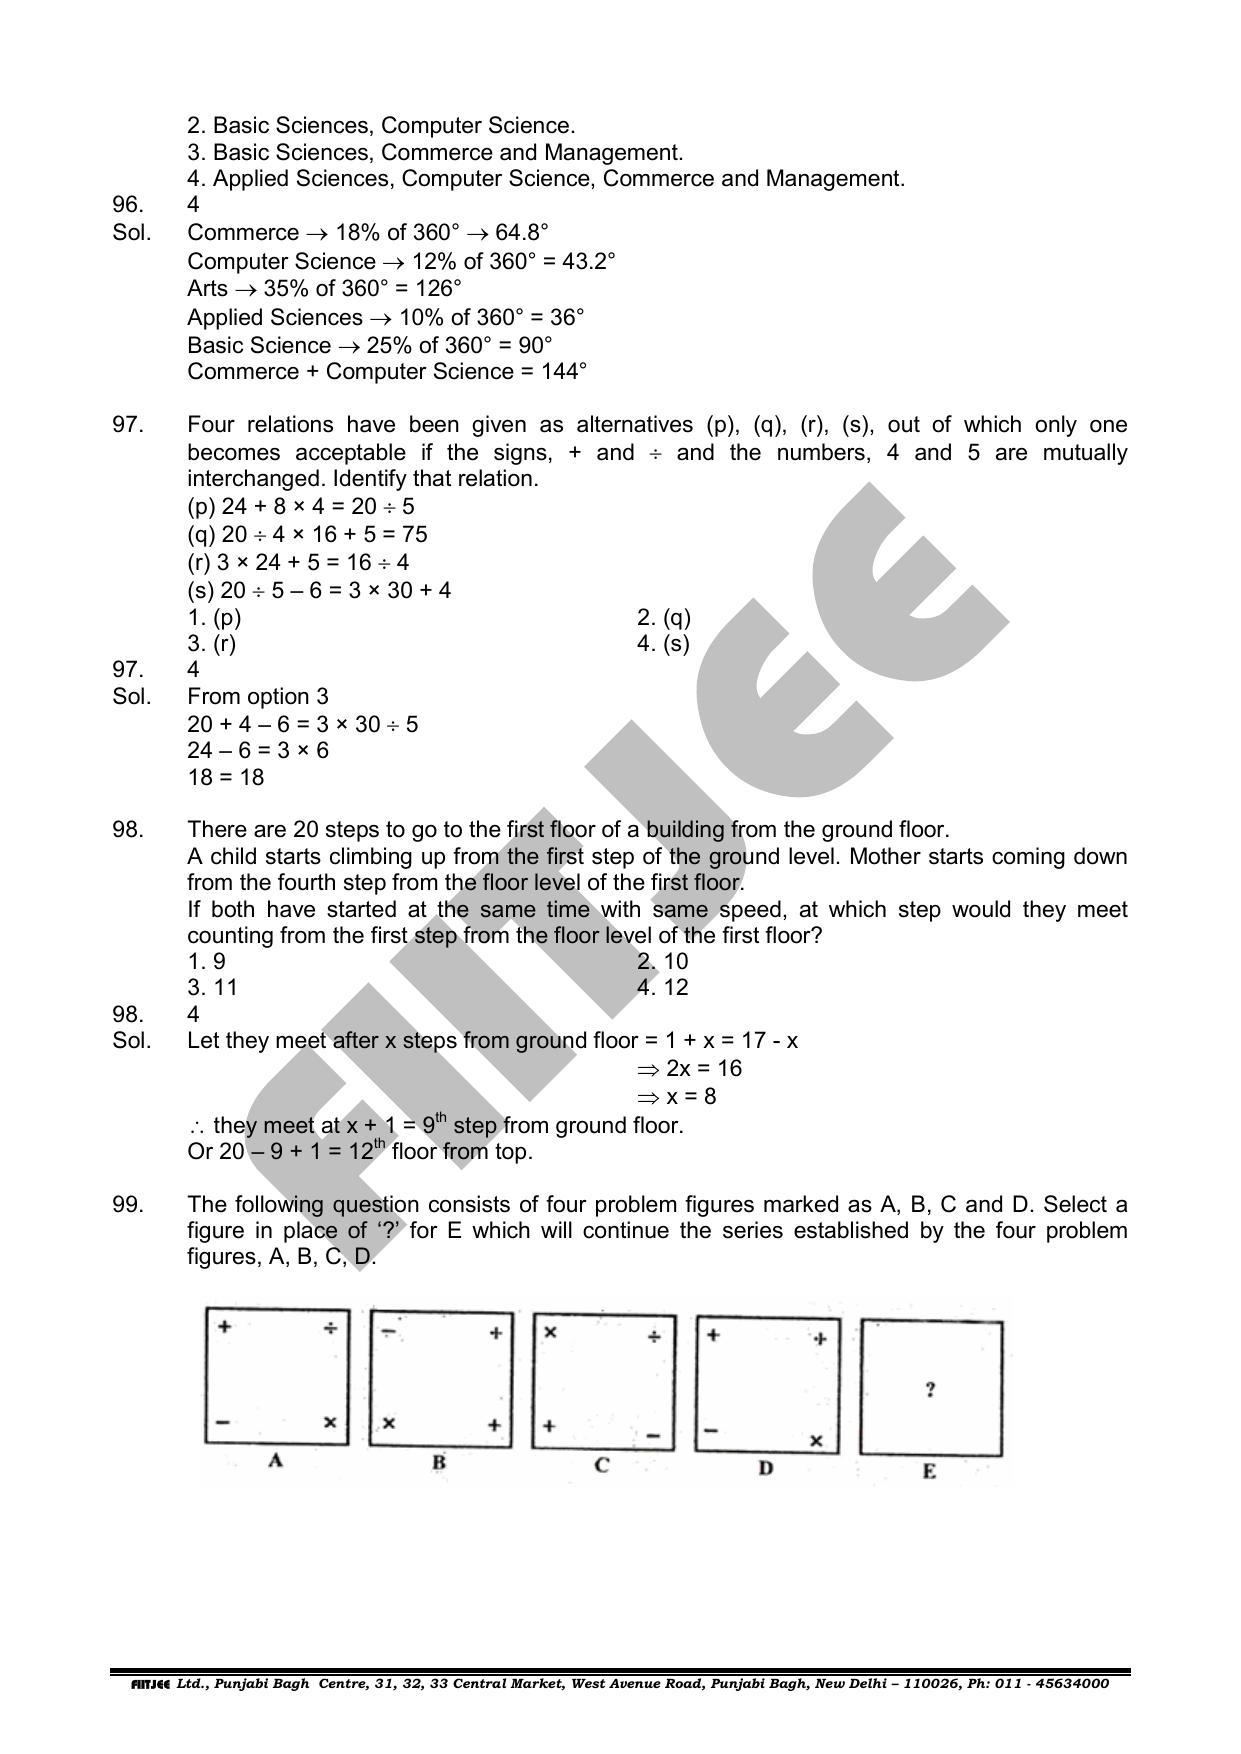 NTSE 2019 (Stage II) MAT Question Paper with Solution (June 16, 2019) - Page 31